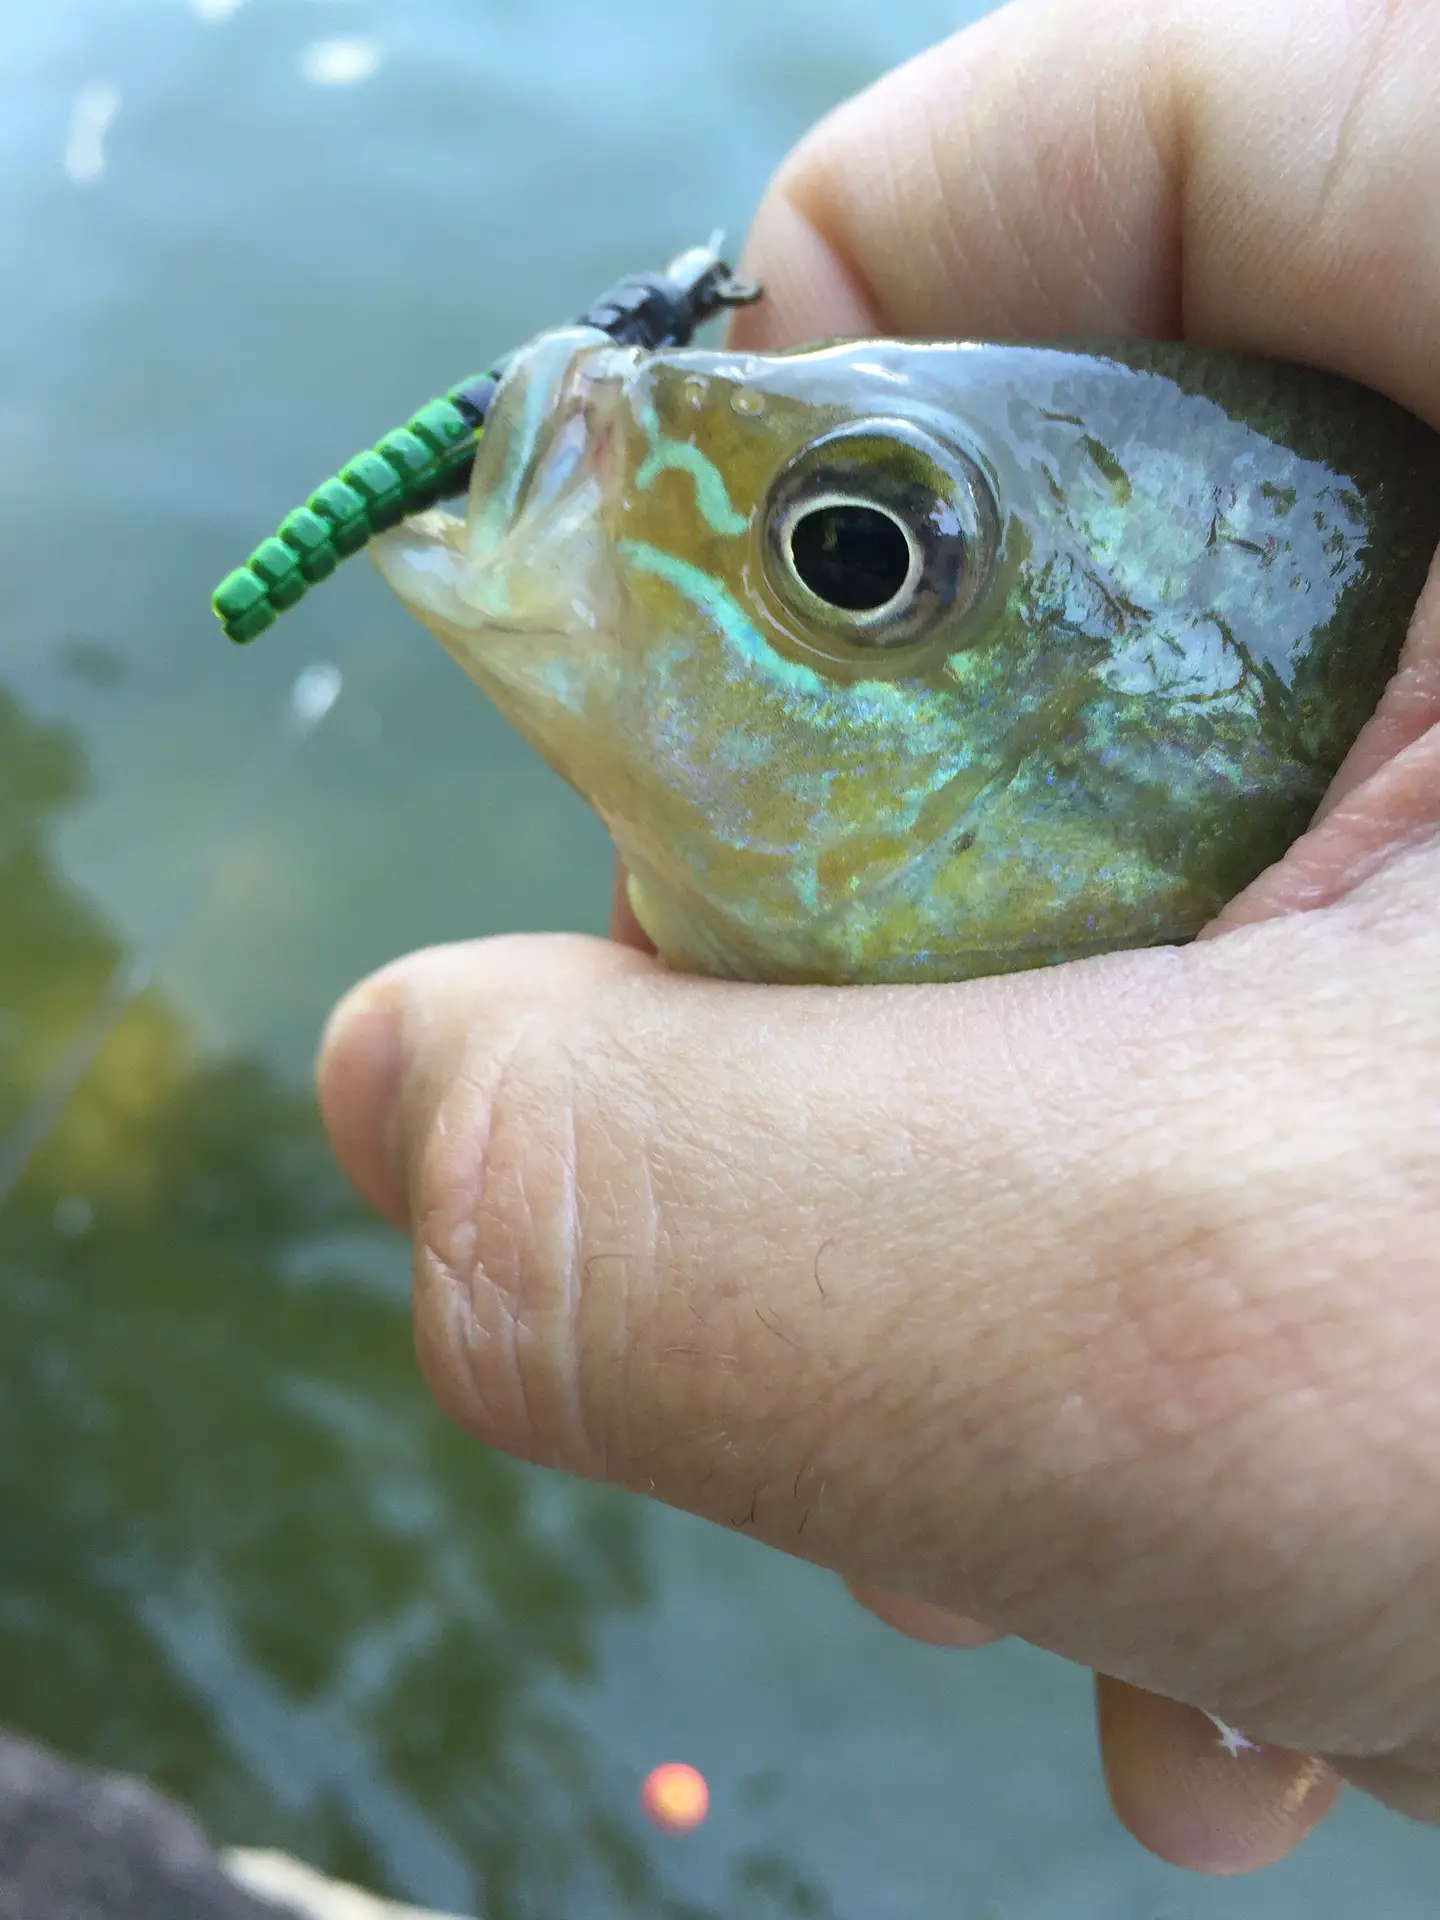 An angler holding a caught sunfish